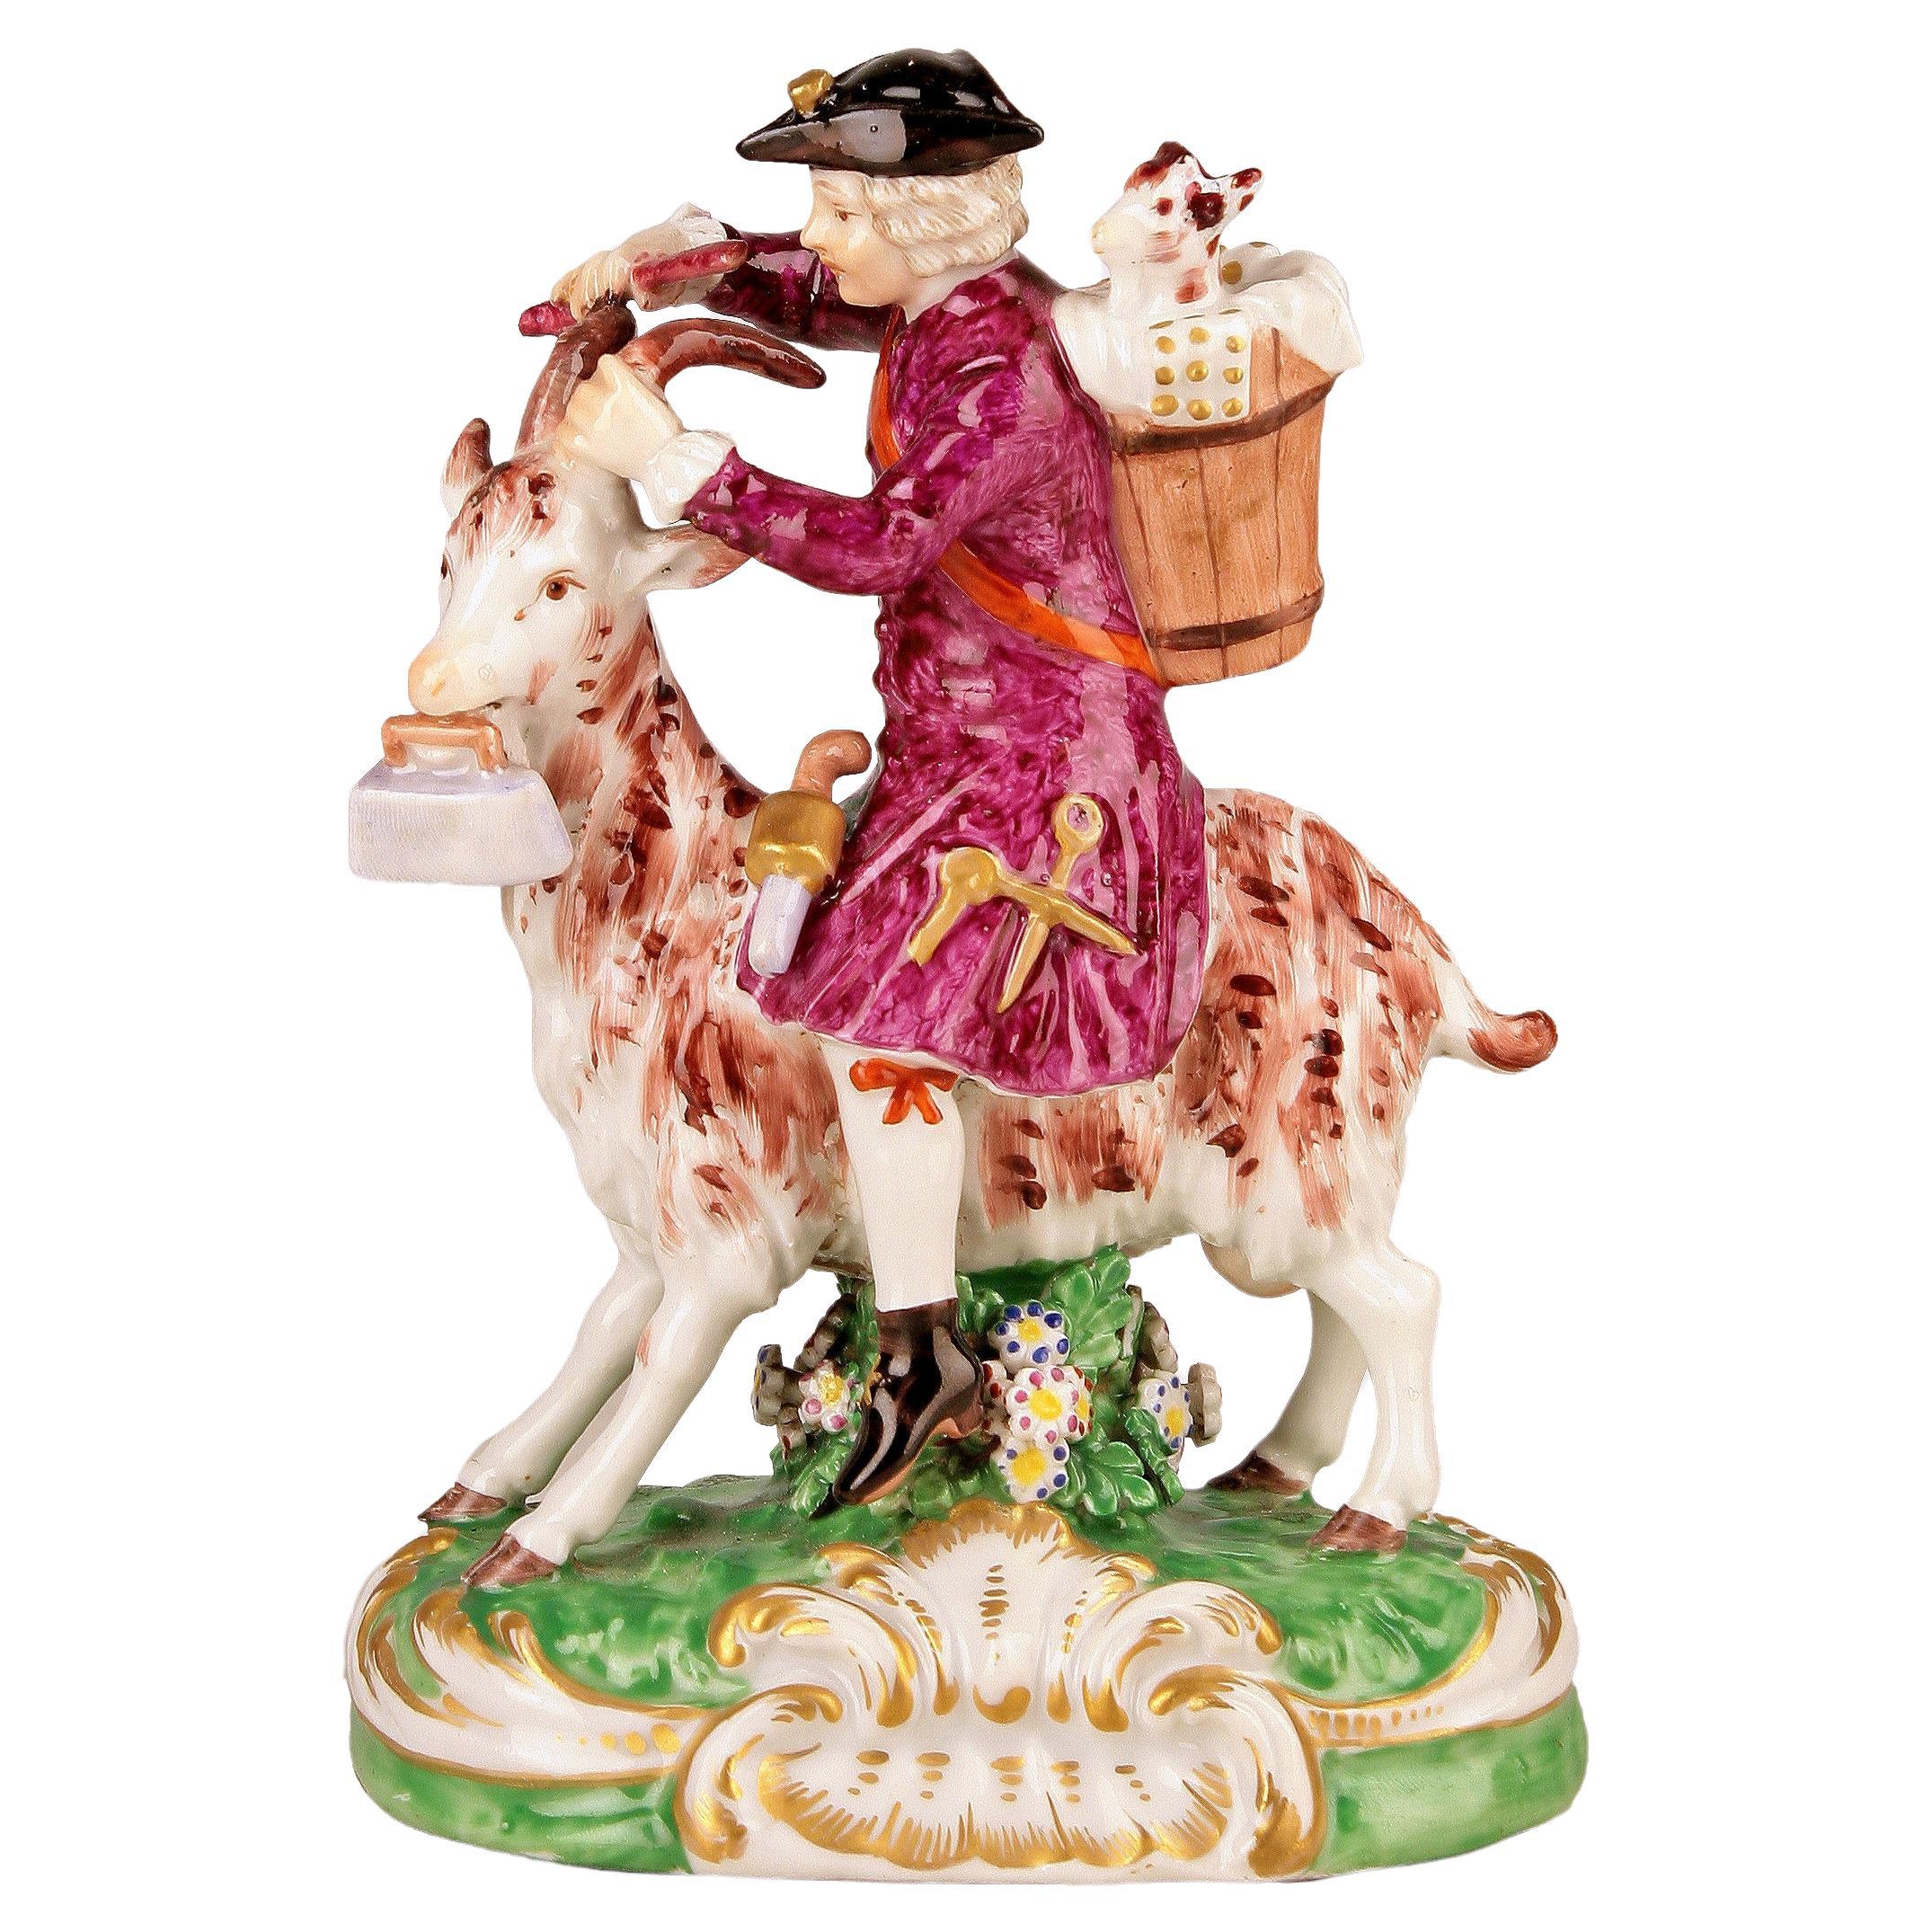 18th C. Baroque/Rococo English Goat-Riding Tailor Porcelain by Chelsea Pottery For Sale